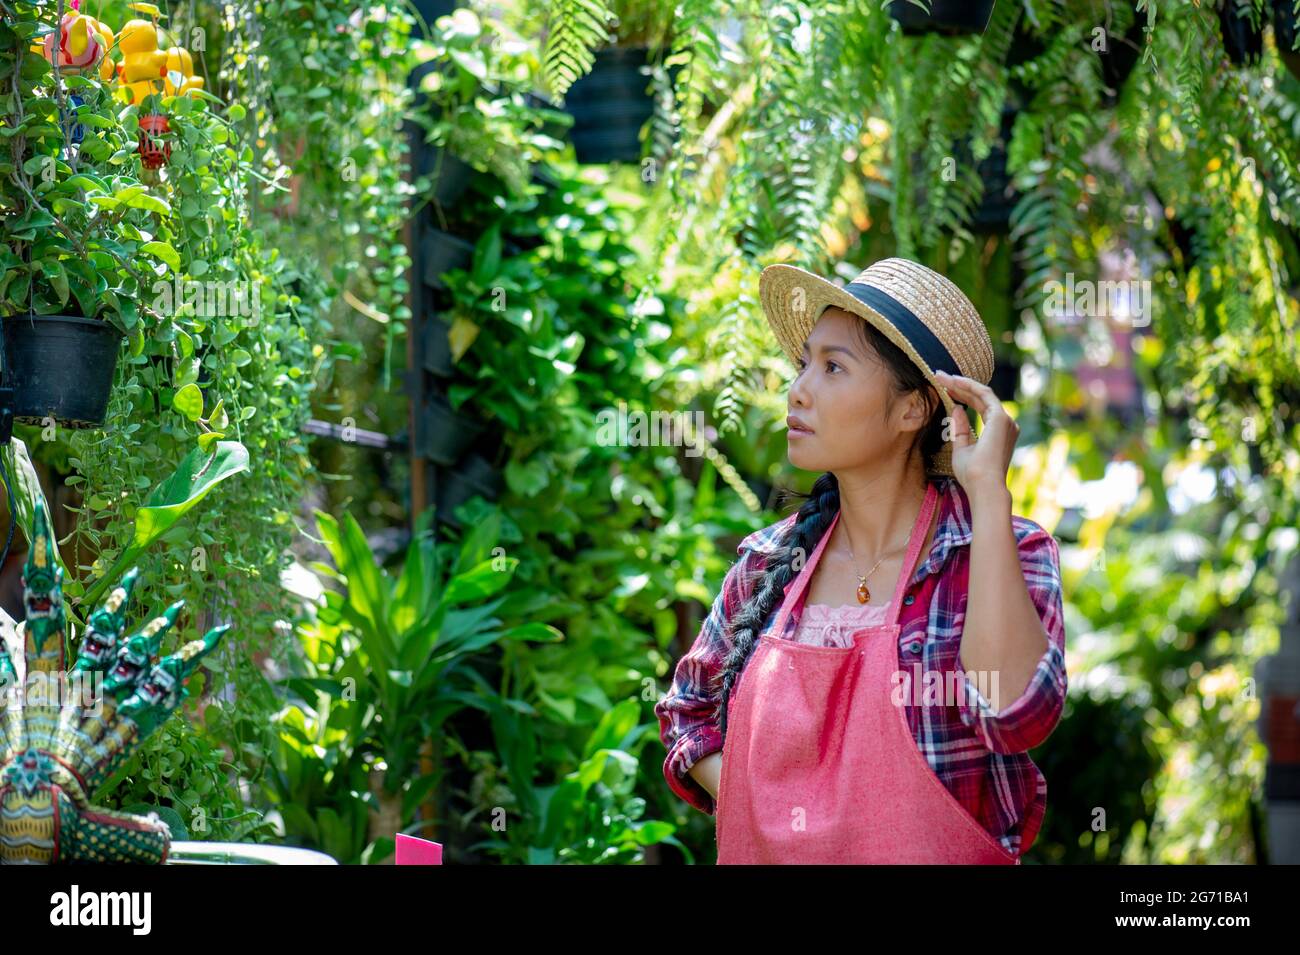 Young Asian woman caring for plants in a small garden shop. Holding a potted white hydrangea plant watering flower pots. Sitting on knees in the walkw Stock Photo